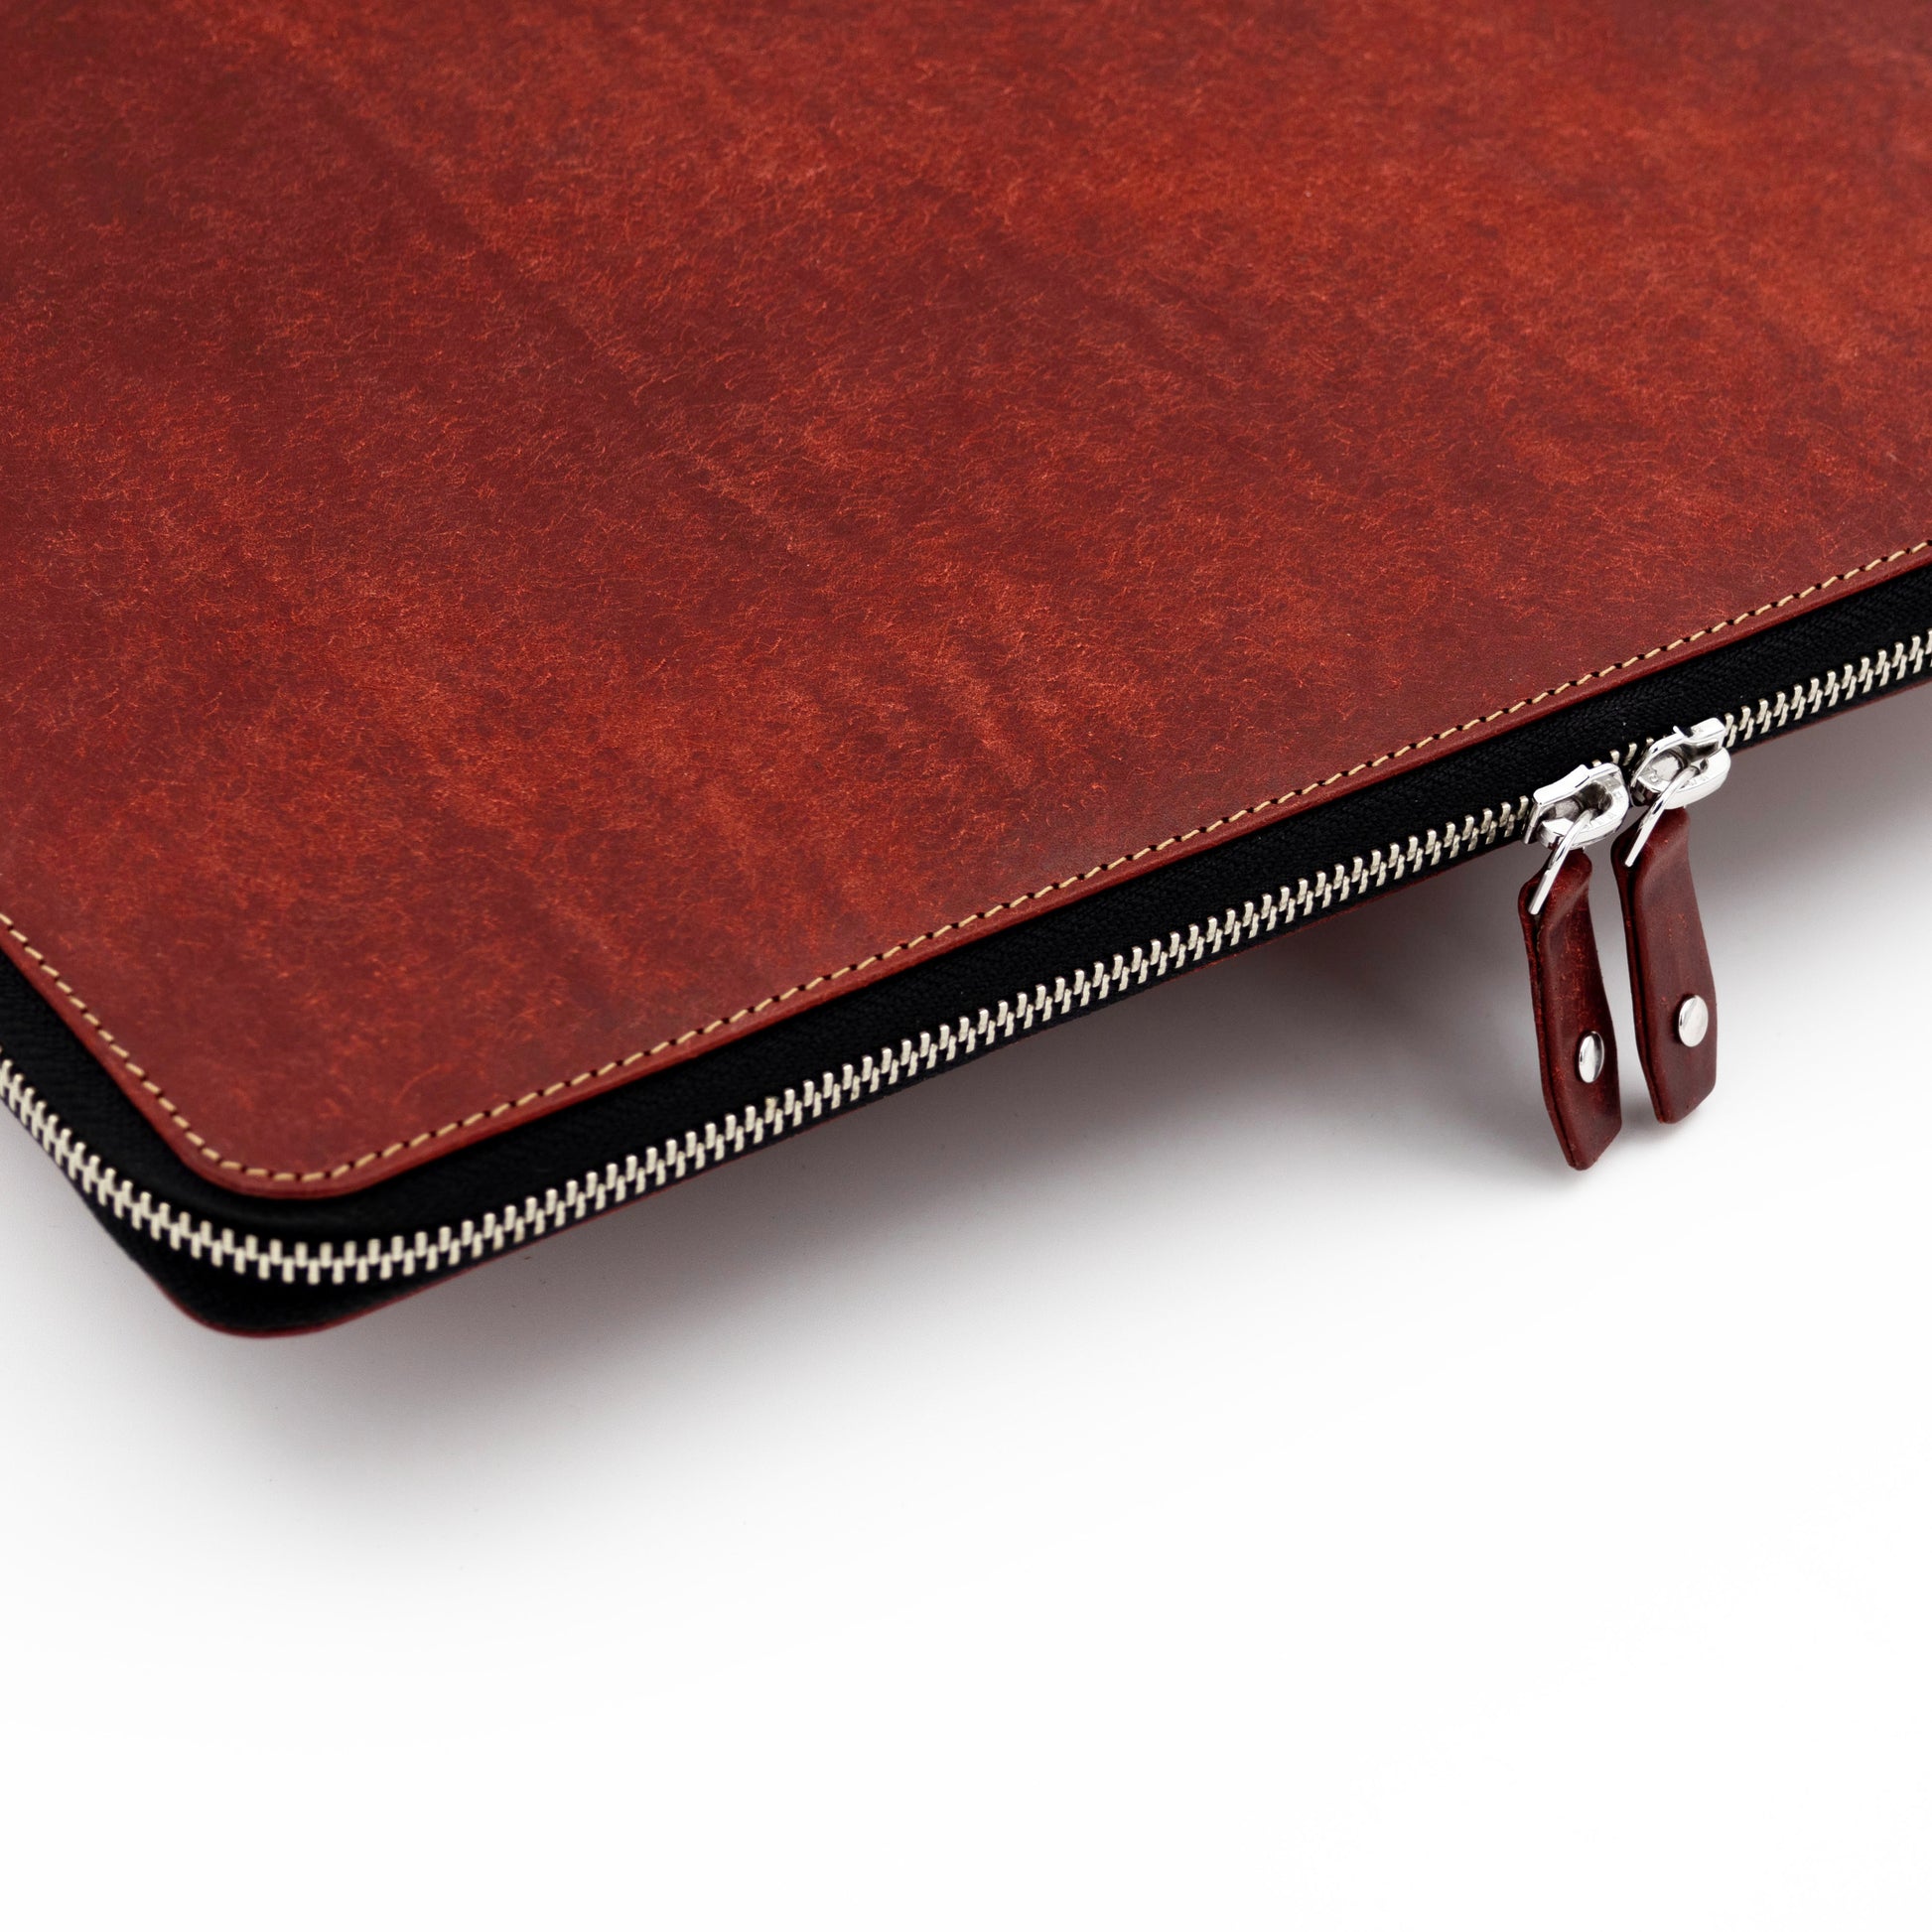 Leather laptop case in 'Coccinella' vegetable tanned leather, with a zip around closure. The laptop case is slim and can fit in our briefcases and backpacks.